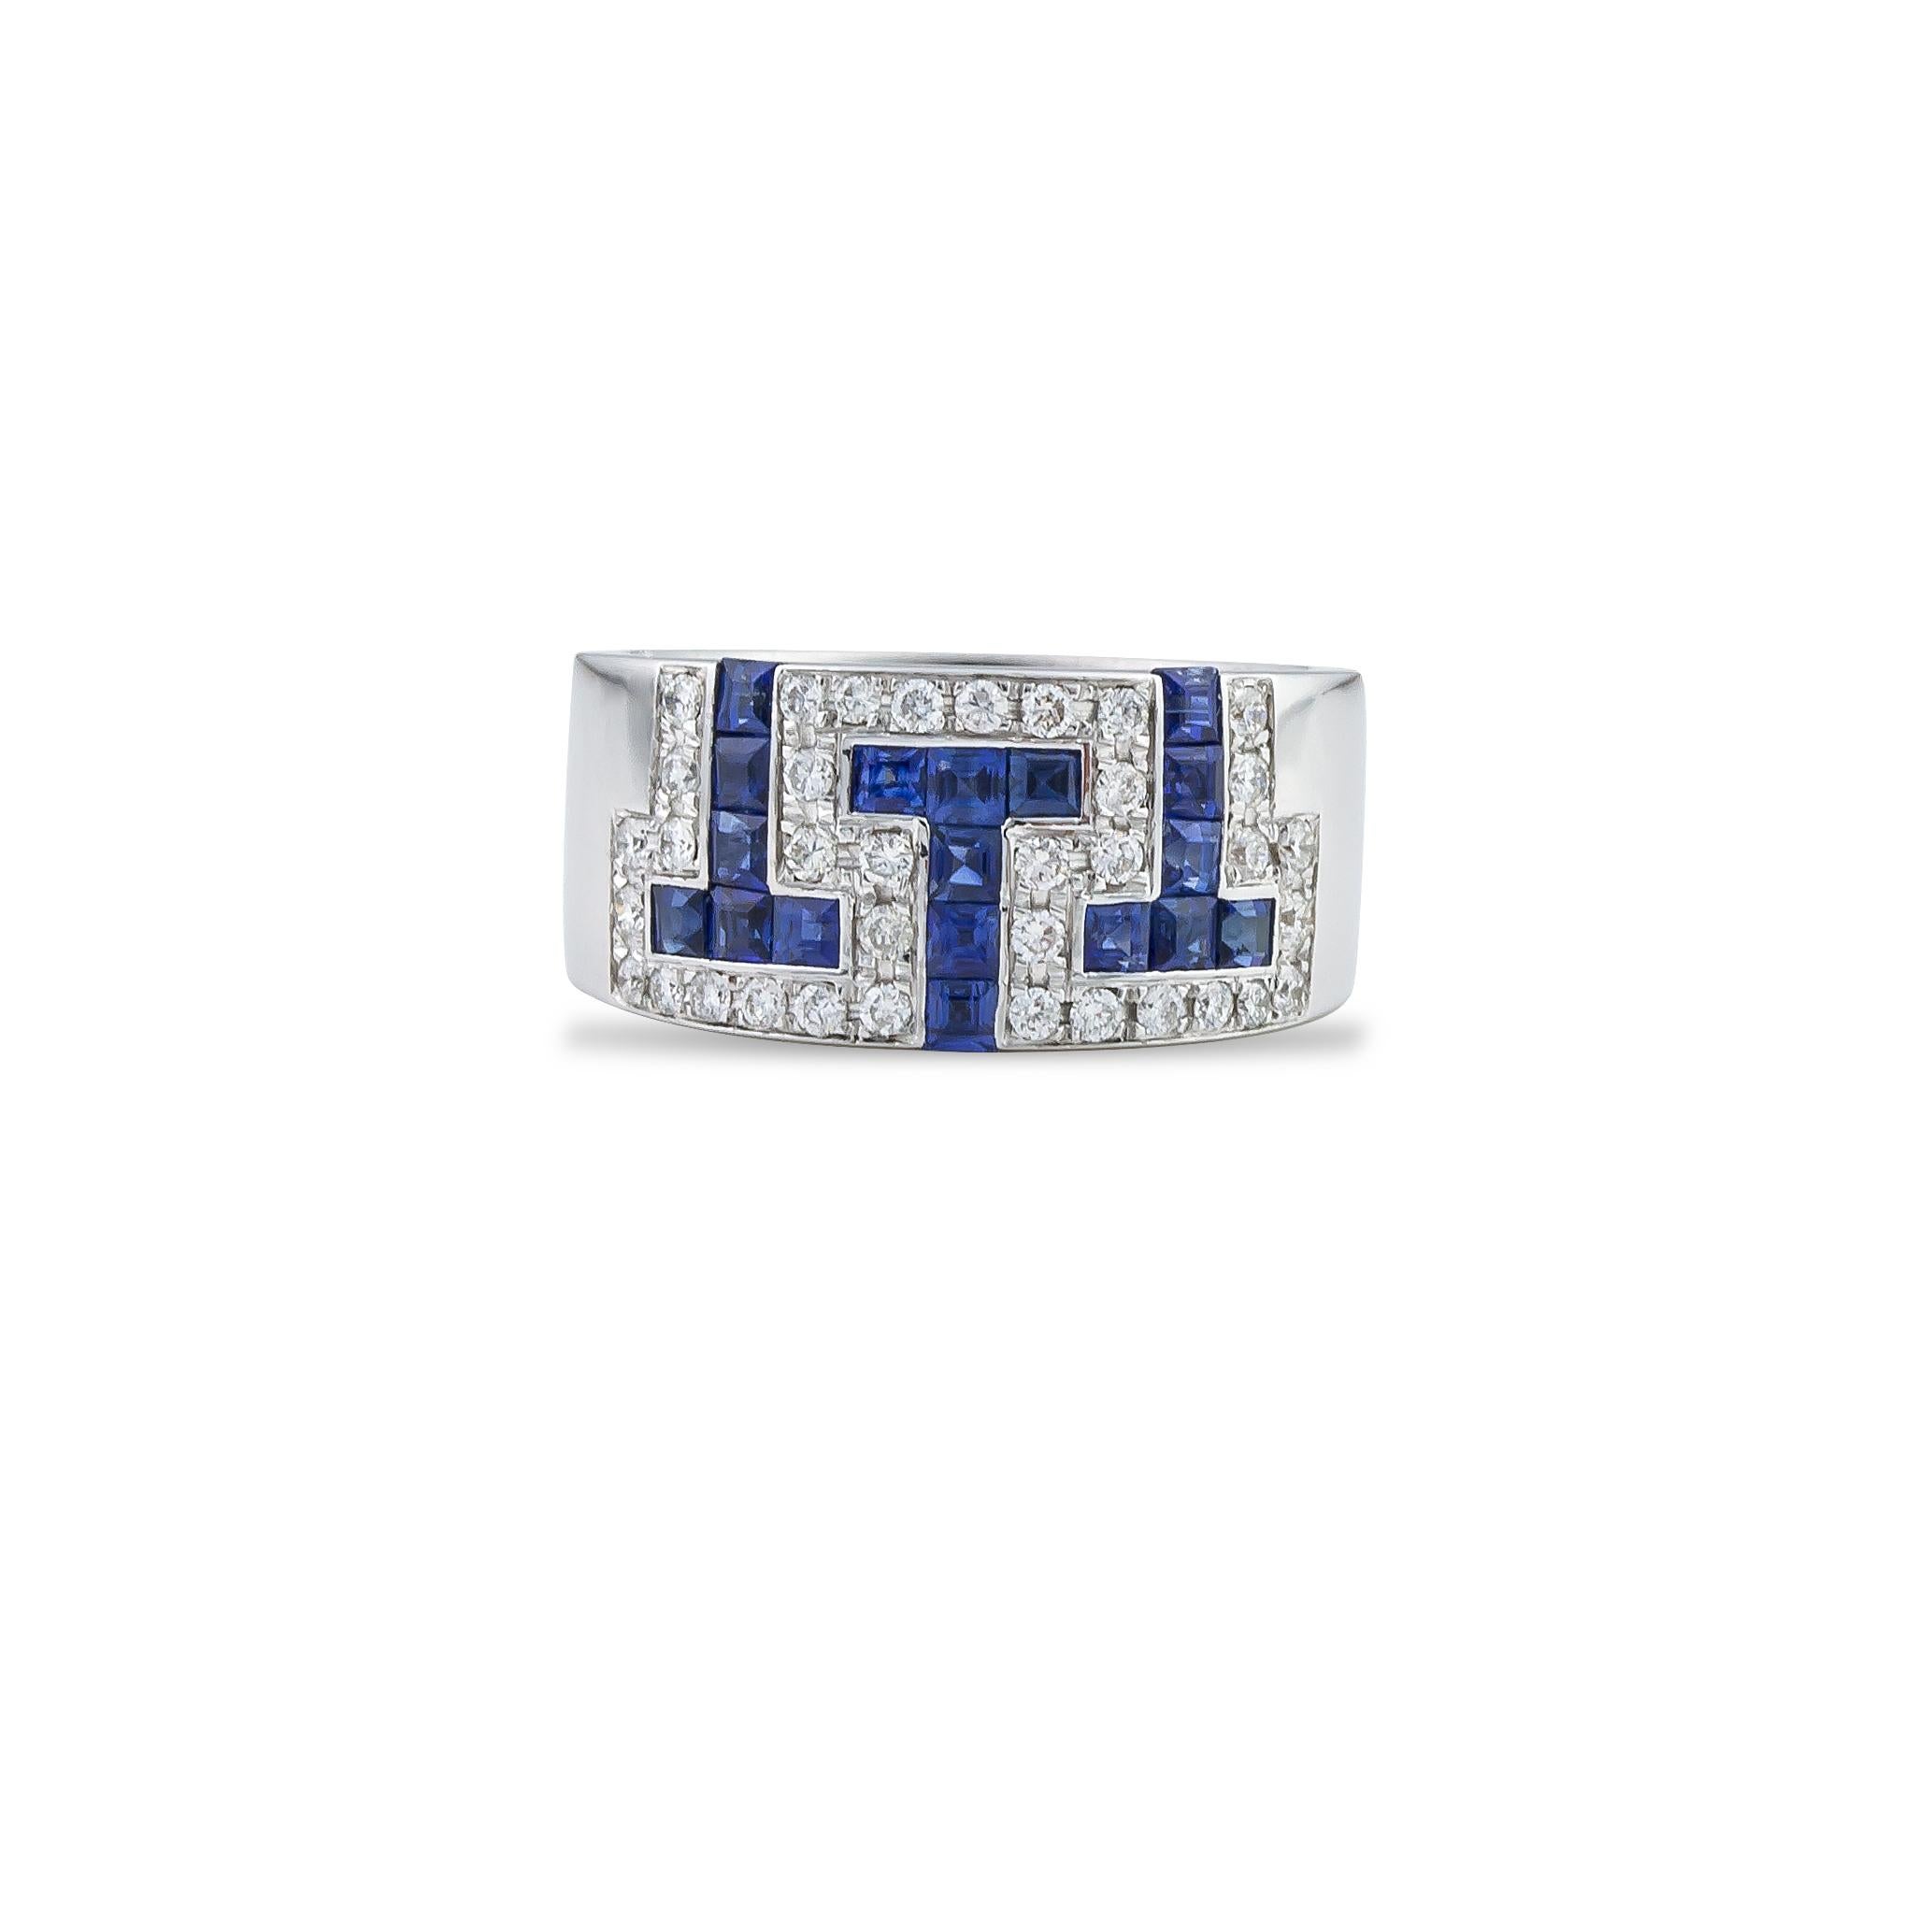 Greek Key Meander ring handcrafted in 18Kt white gold. Scintillating square cut blue Sapphires race the bold form of the Greek key - meander  in this striking and classic design. The white brilliant cut diamonds around the sapphires reflect the